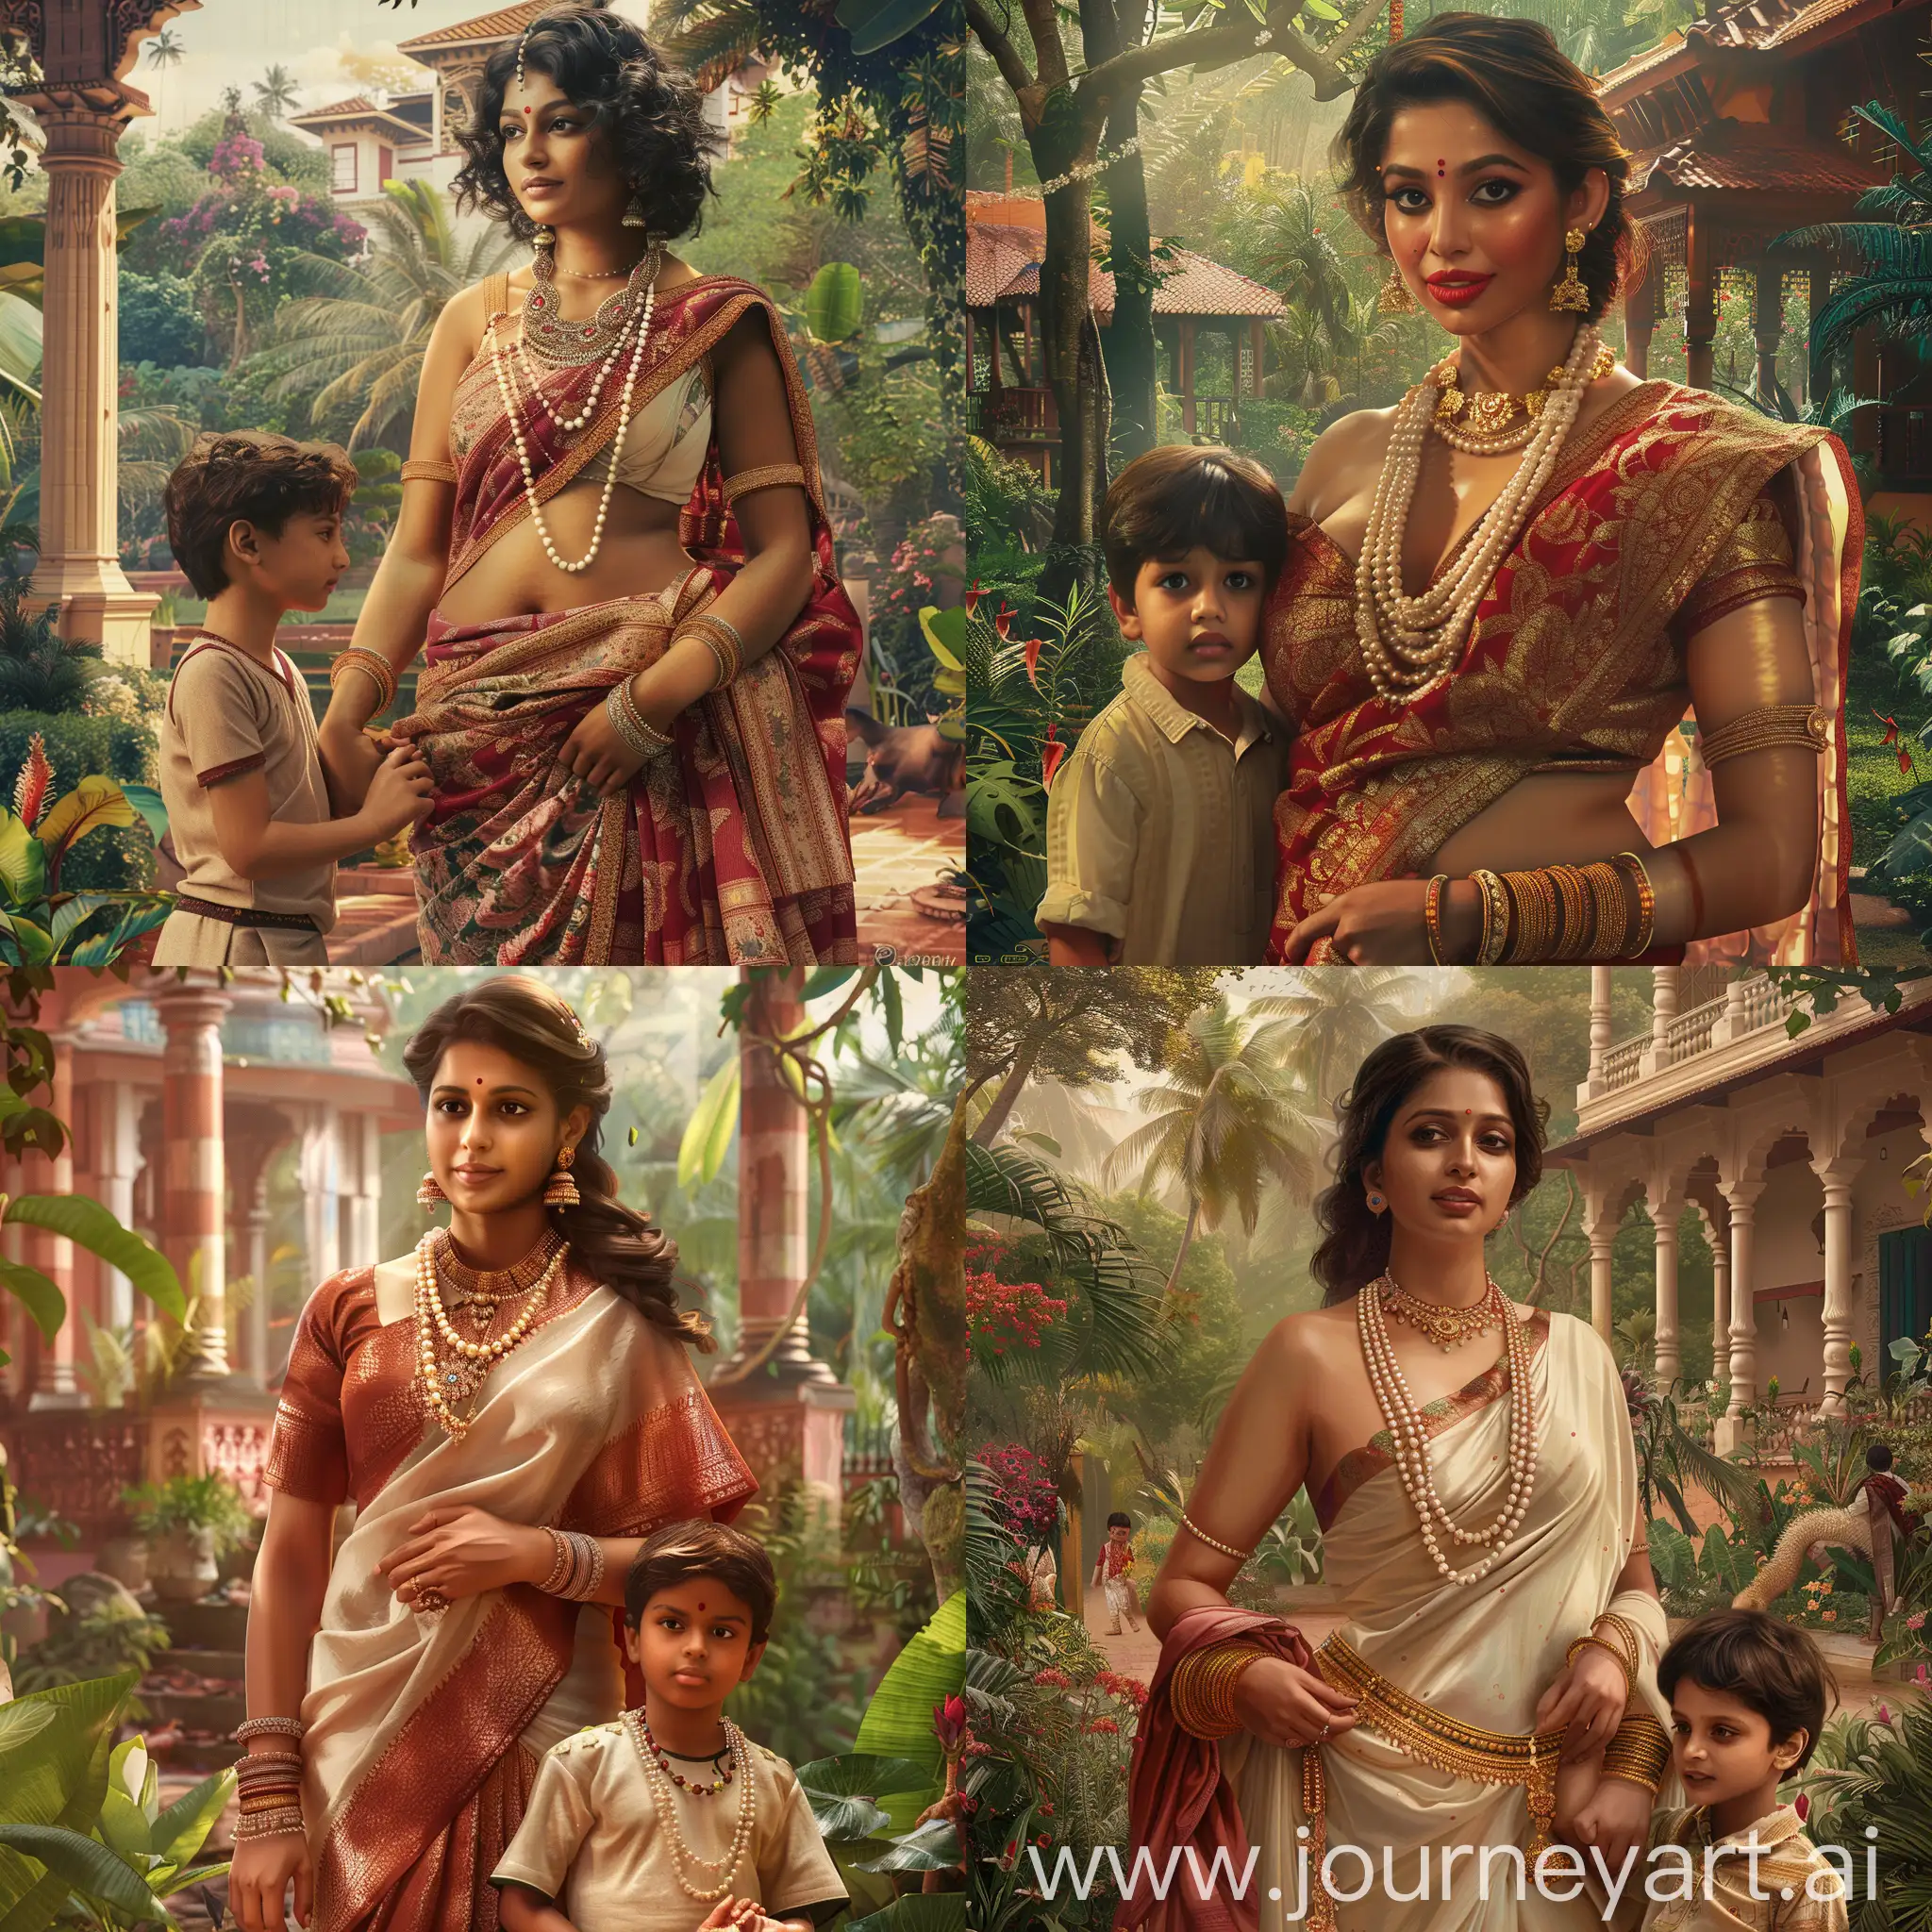 Stunning-Malayali-Woman-and-Son-in-Traditional-Attire-Amidst-Lush-Garden